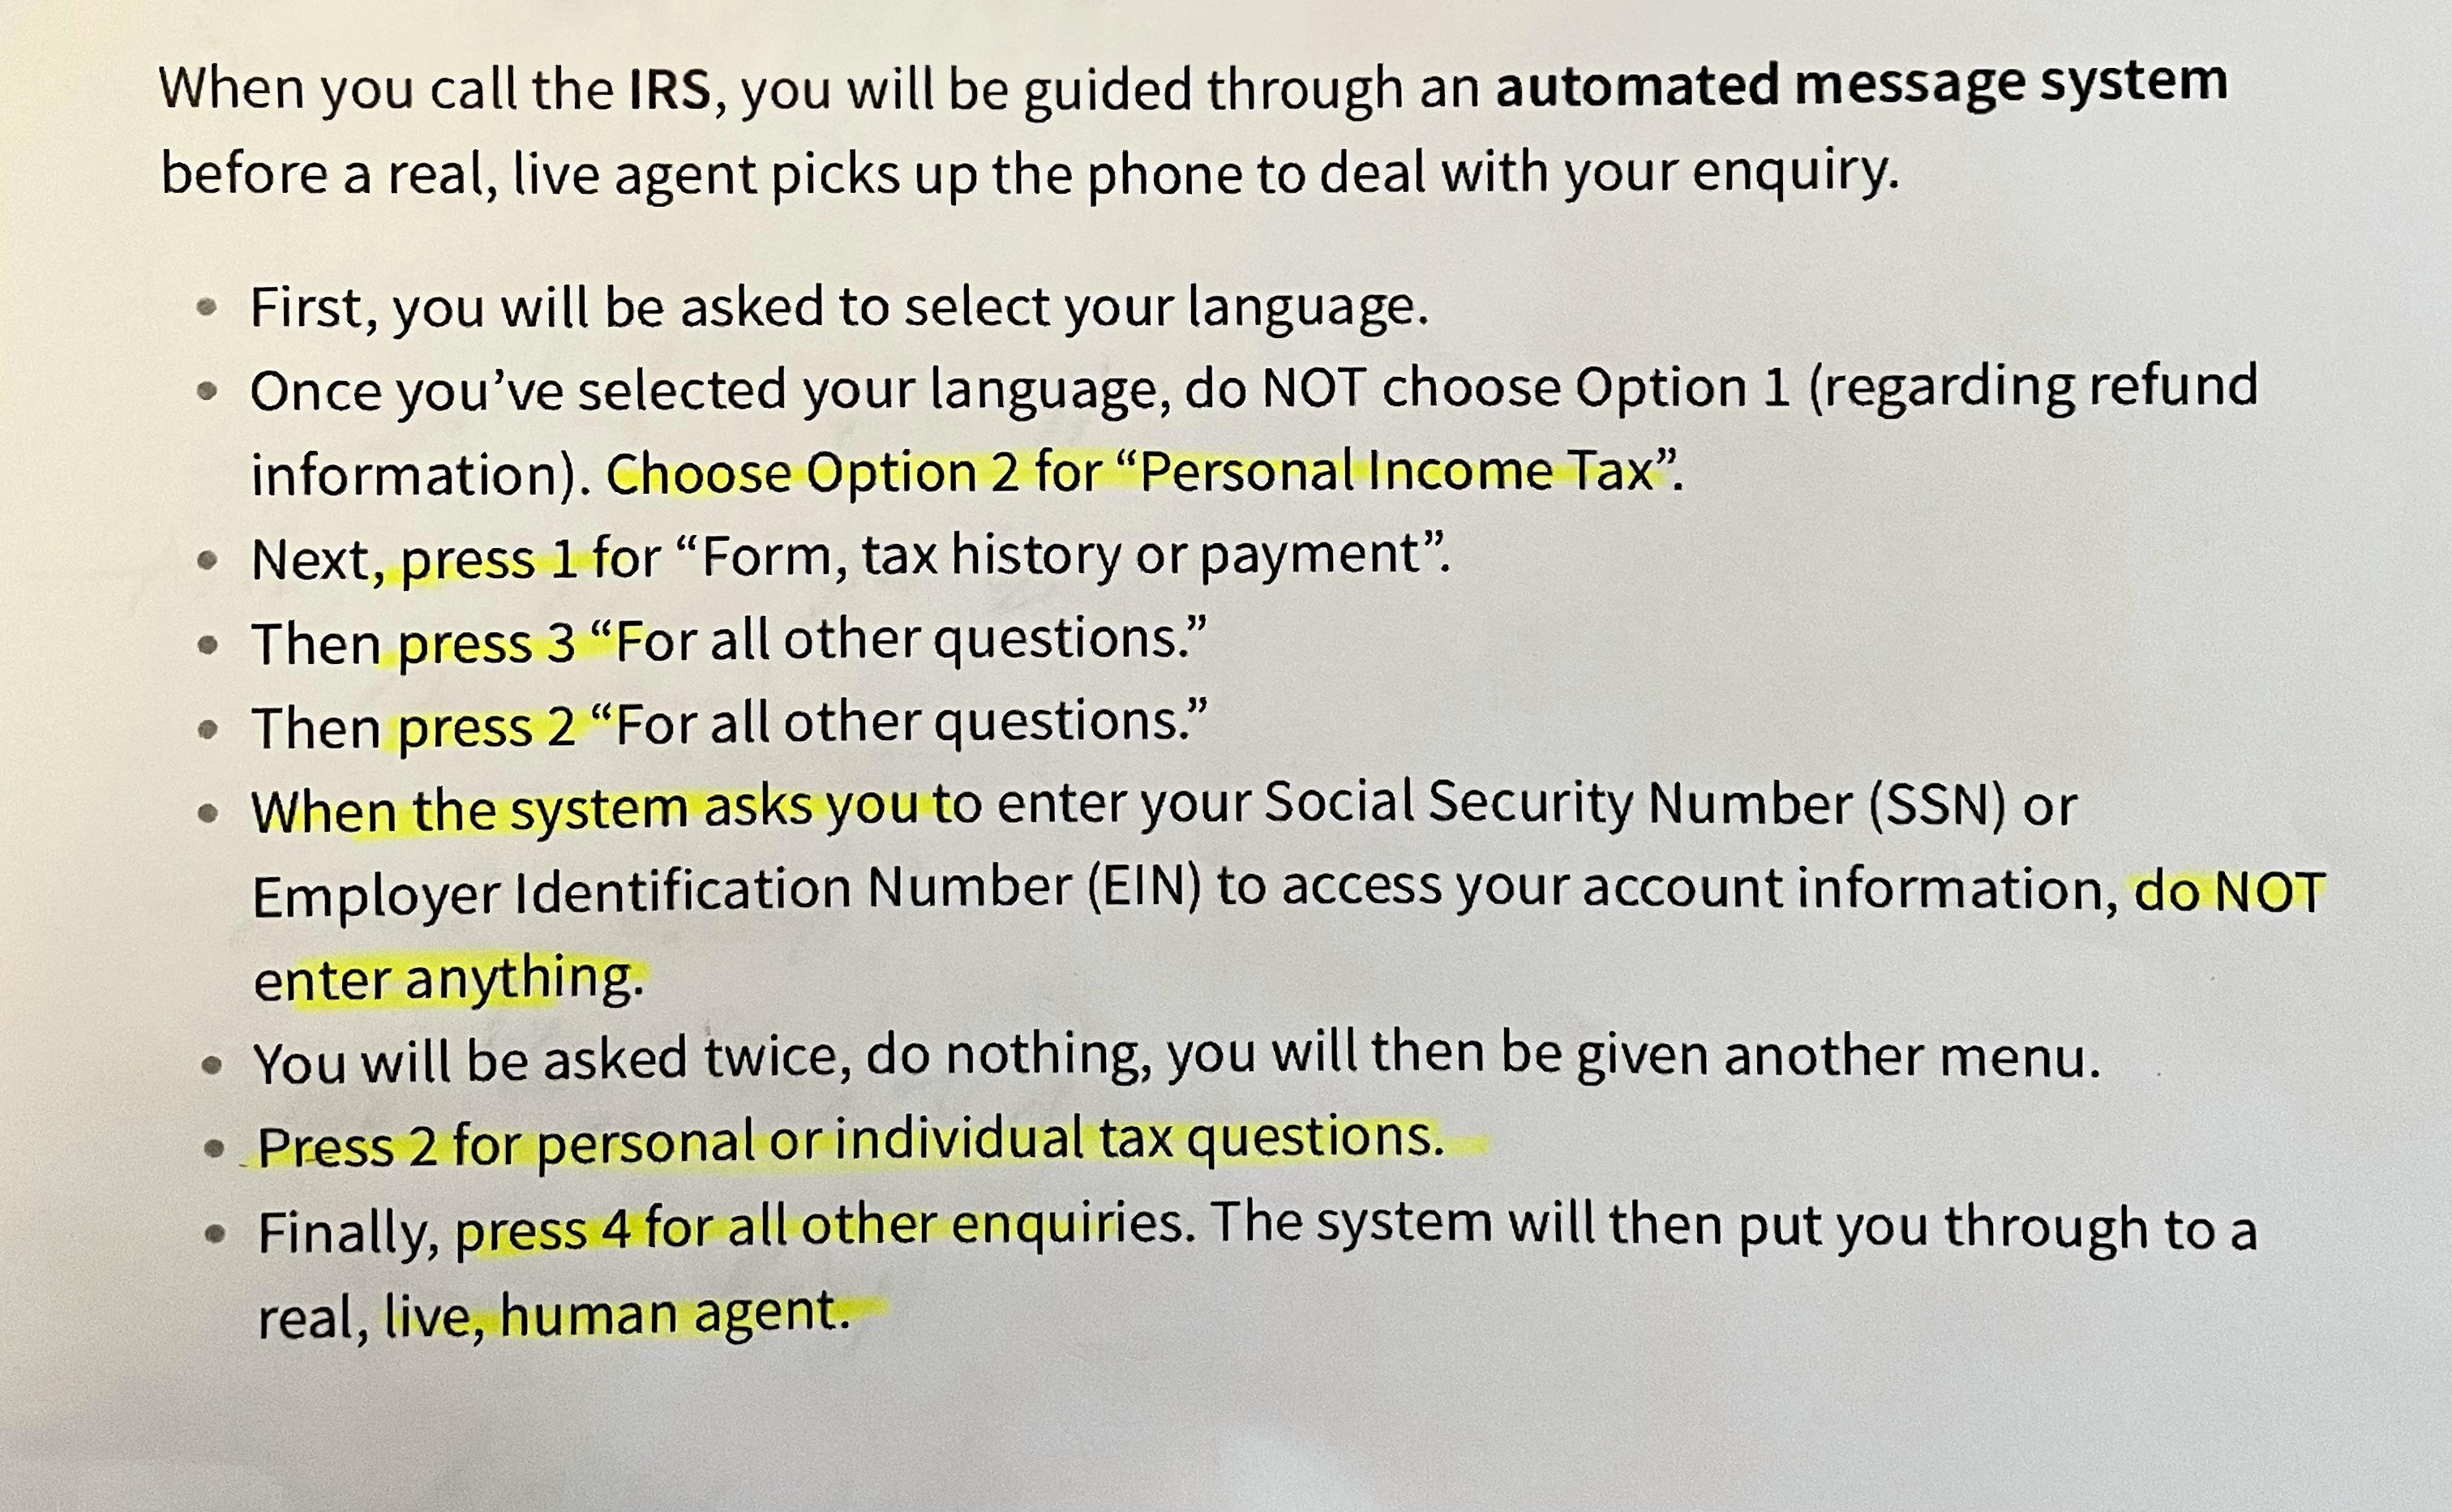 how to talk with a human at the IRS